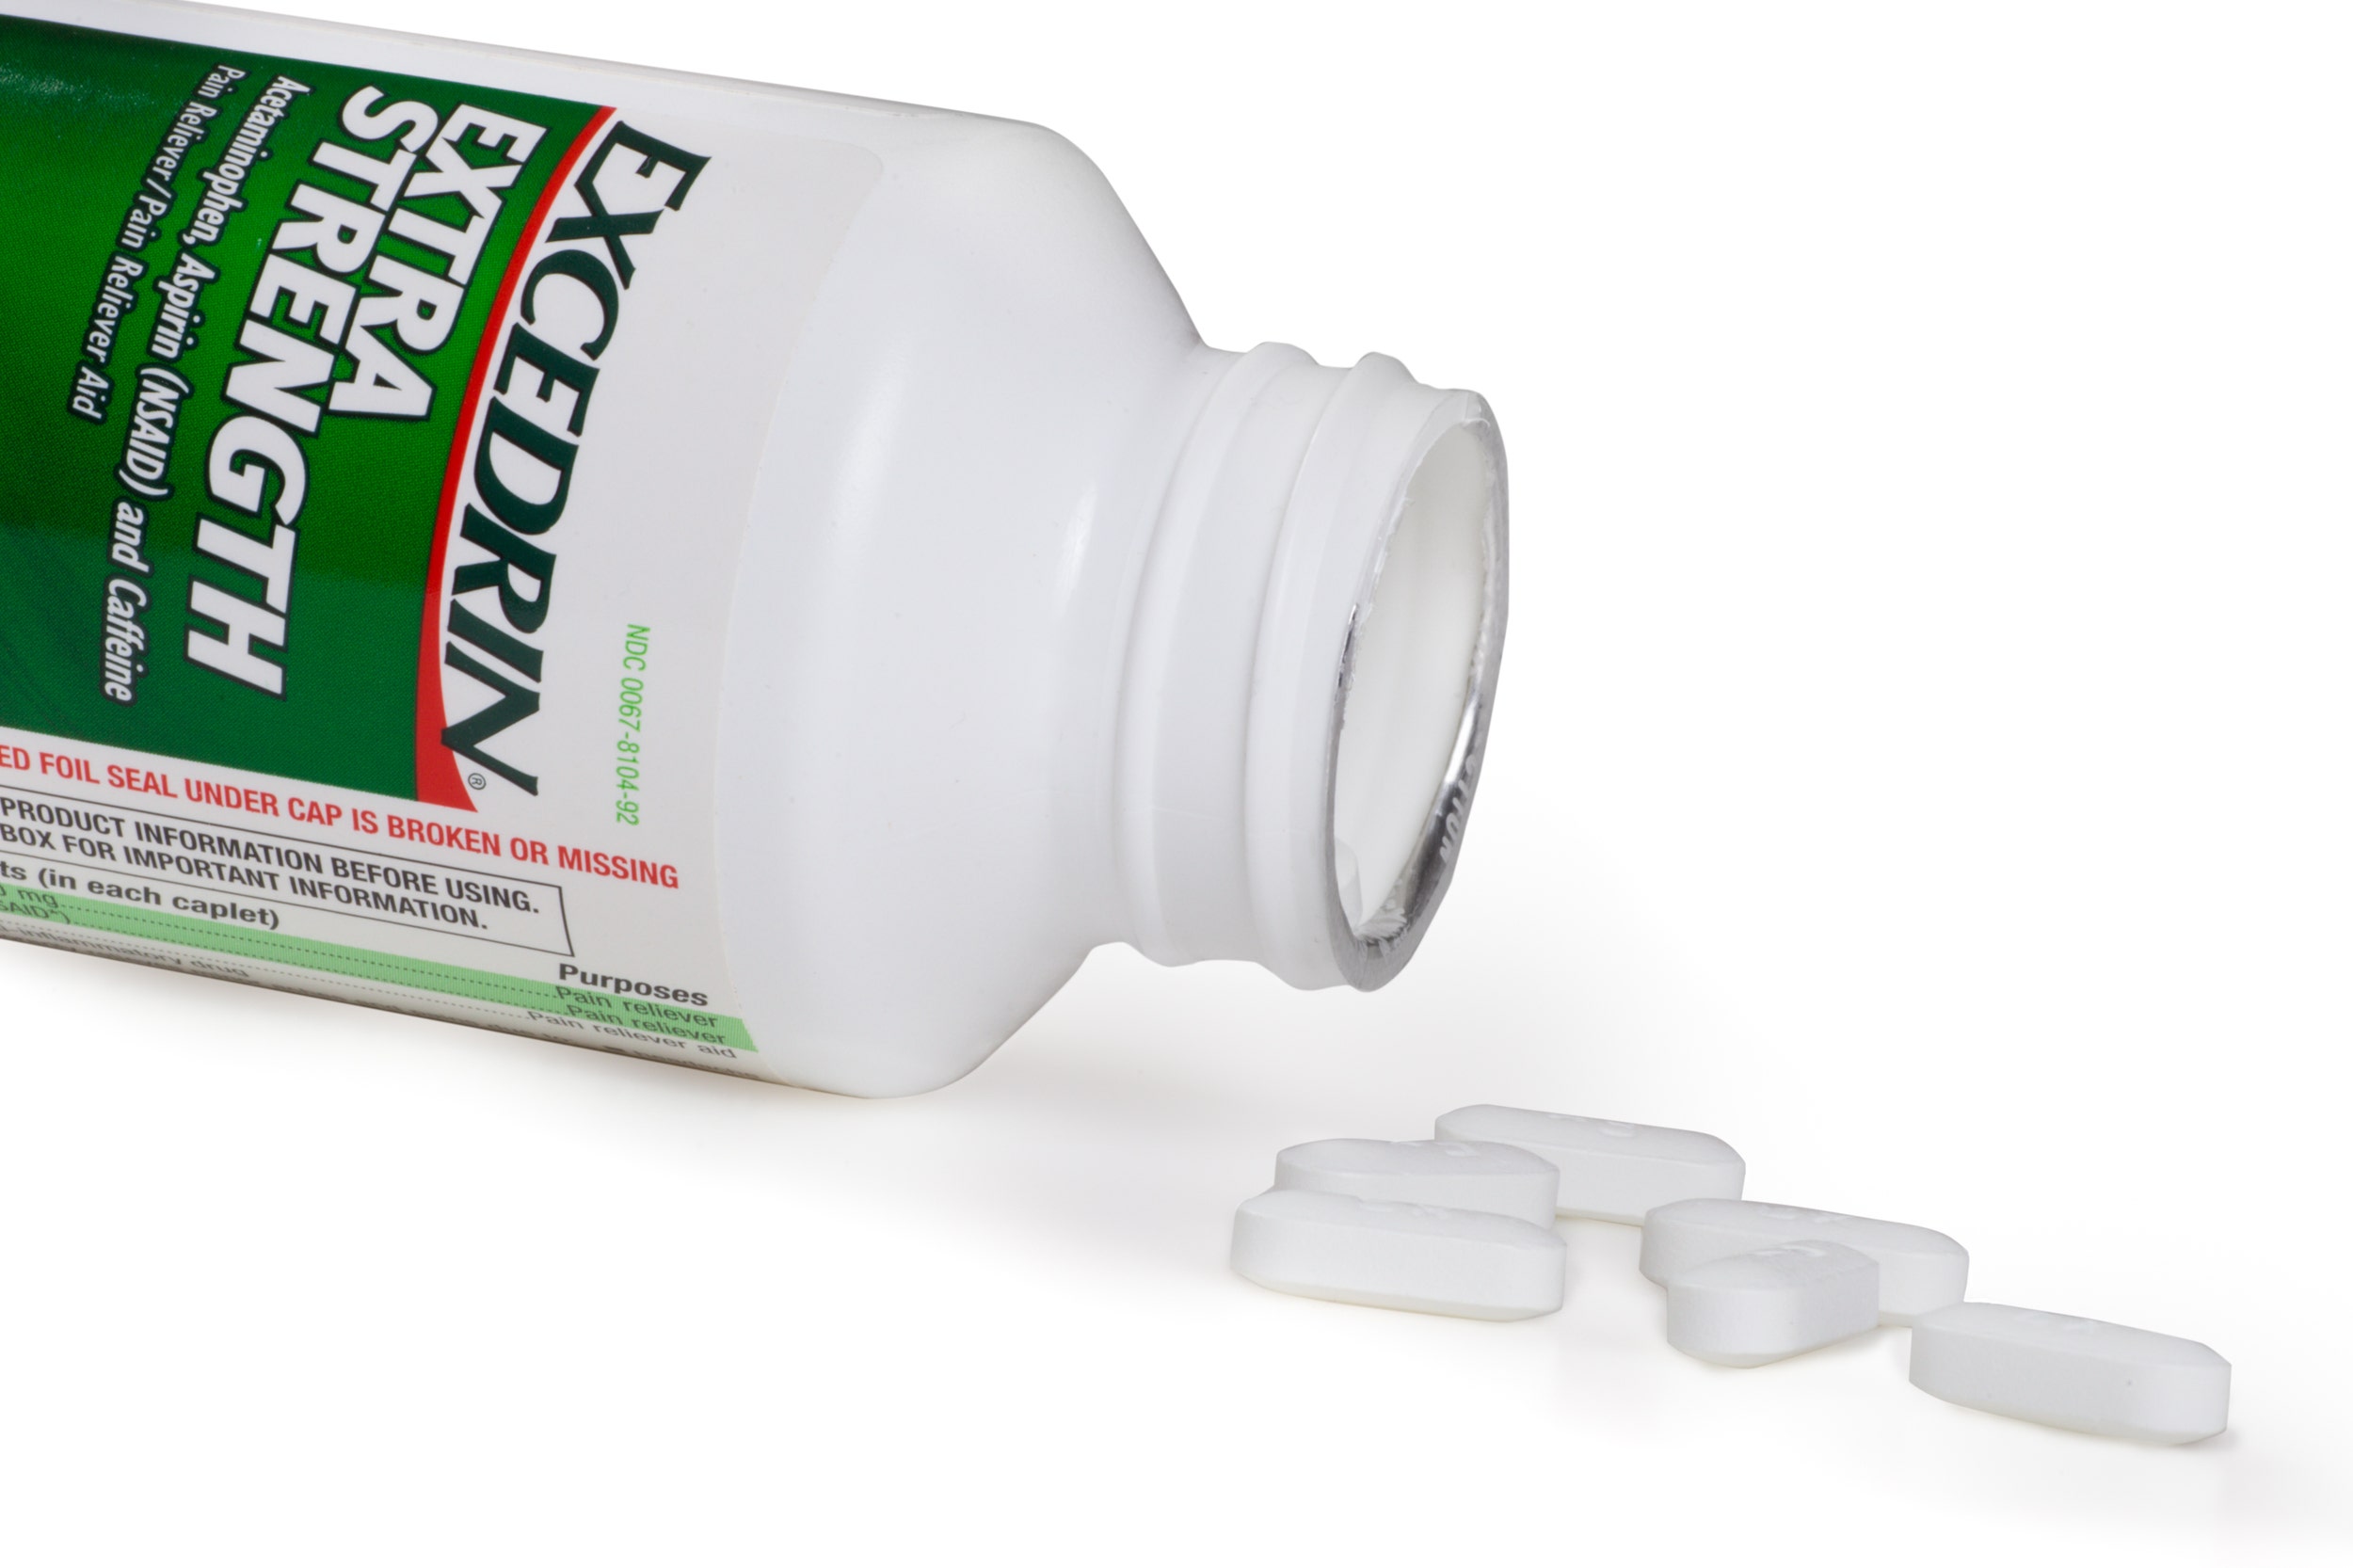 Maker of migraine drug, Excedrin, pauses production